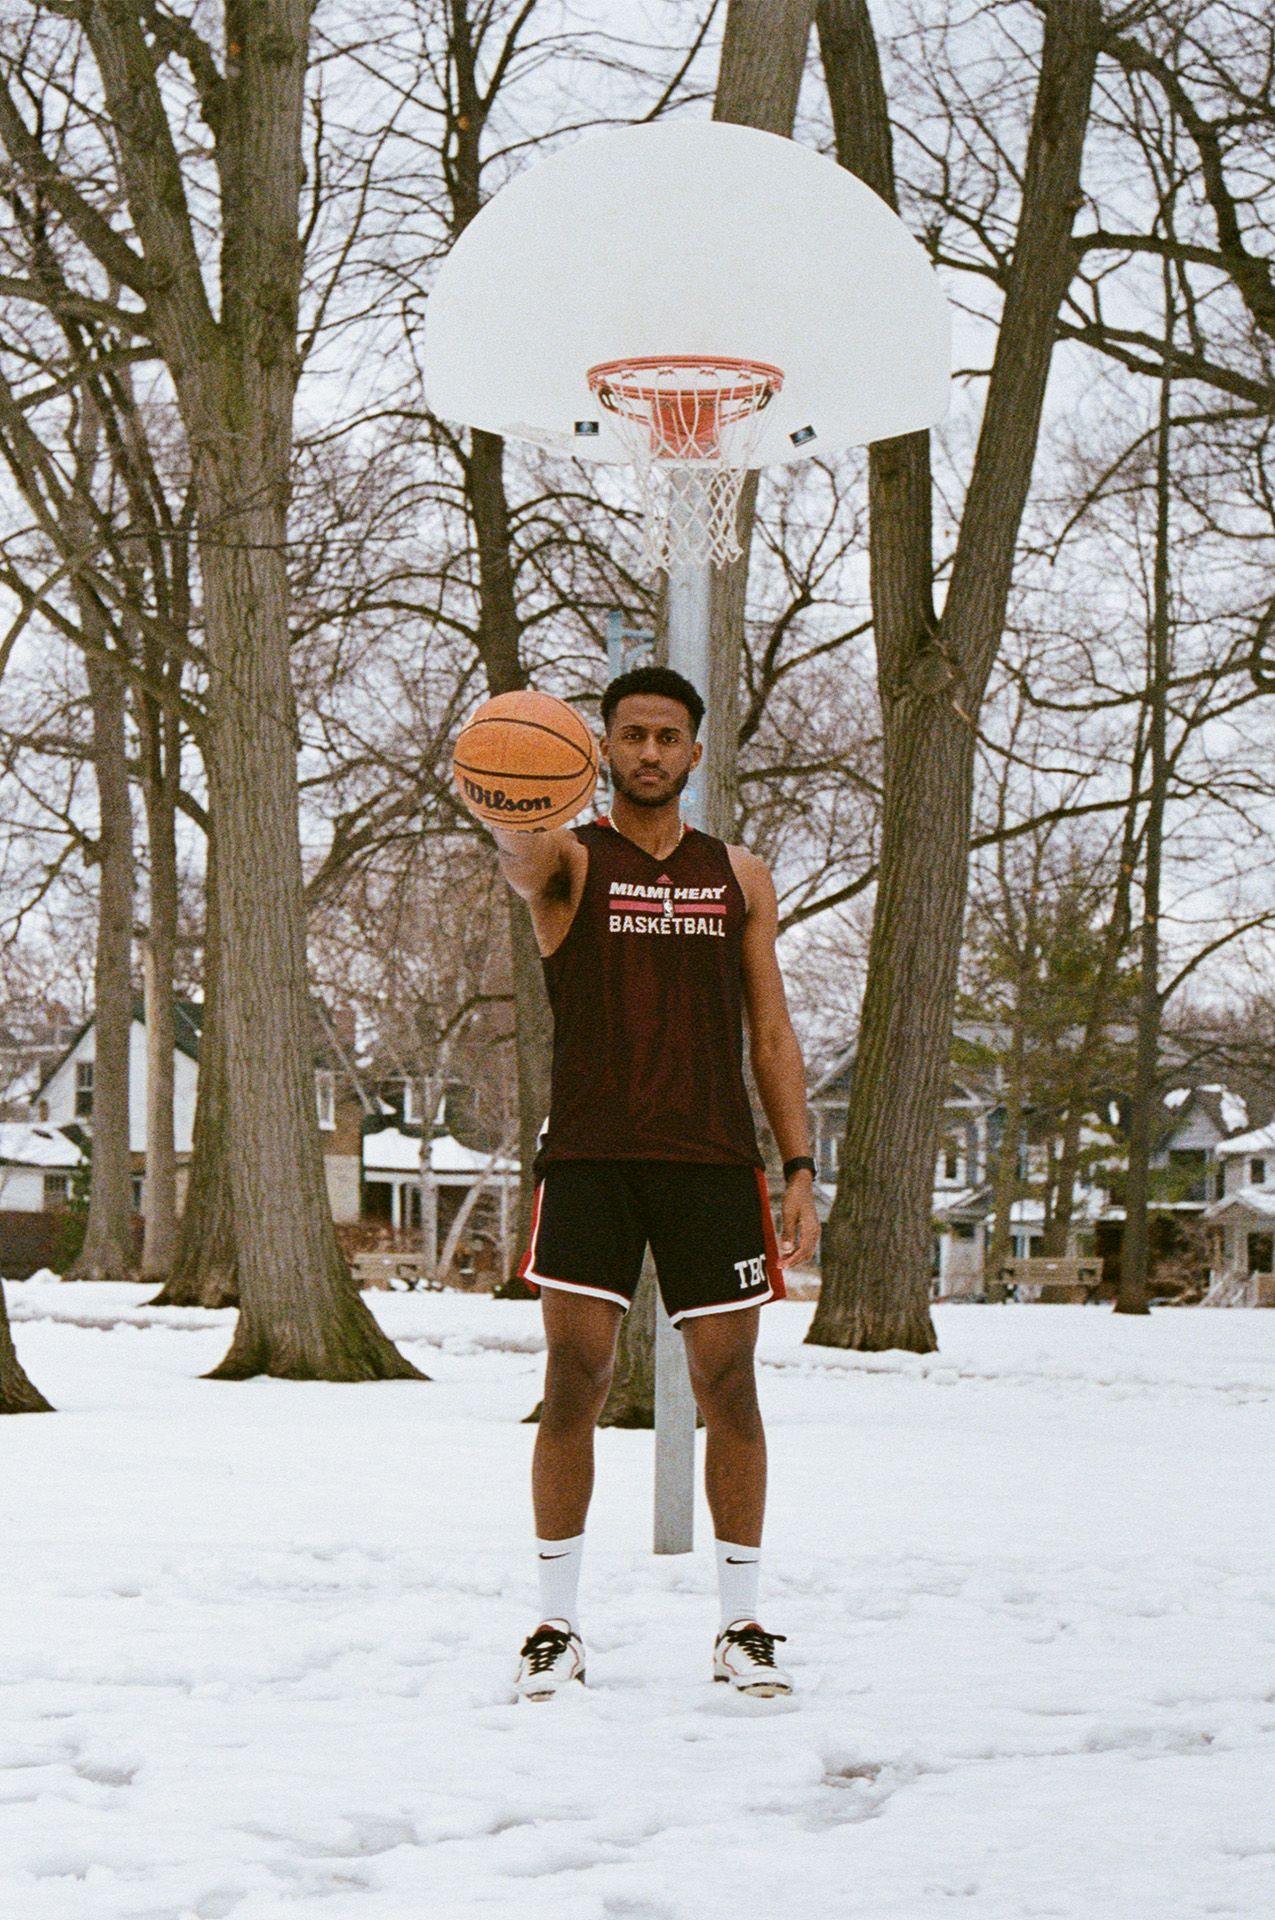 Basketball: A picture of my friend Feli holding a basketball on a snowy court